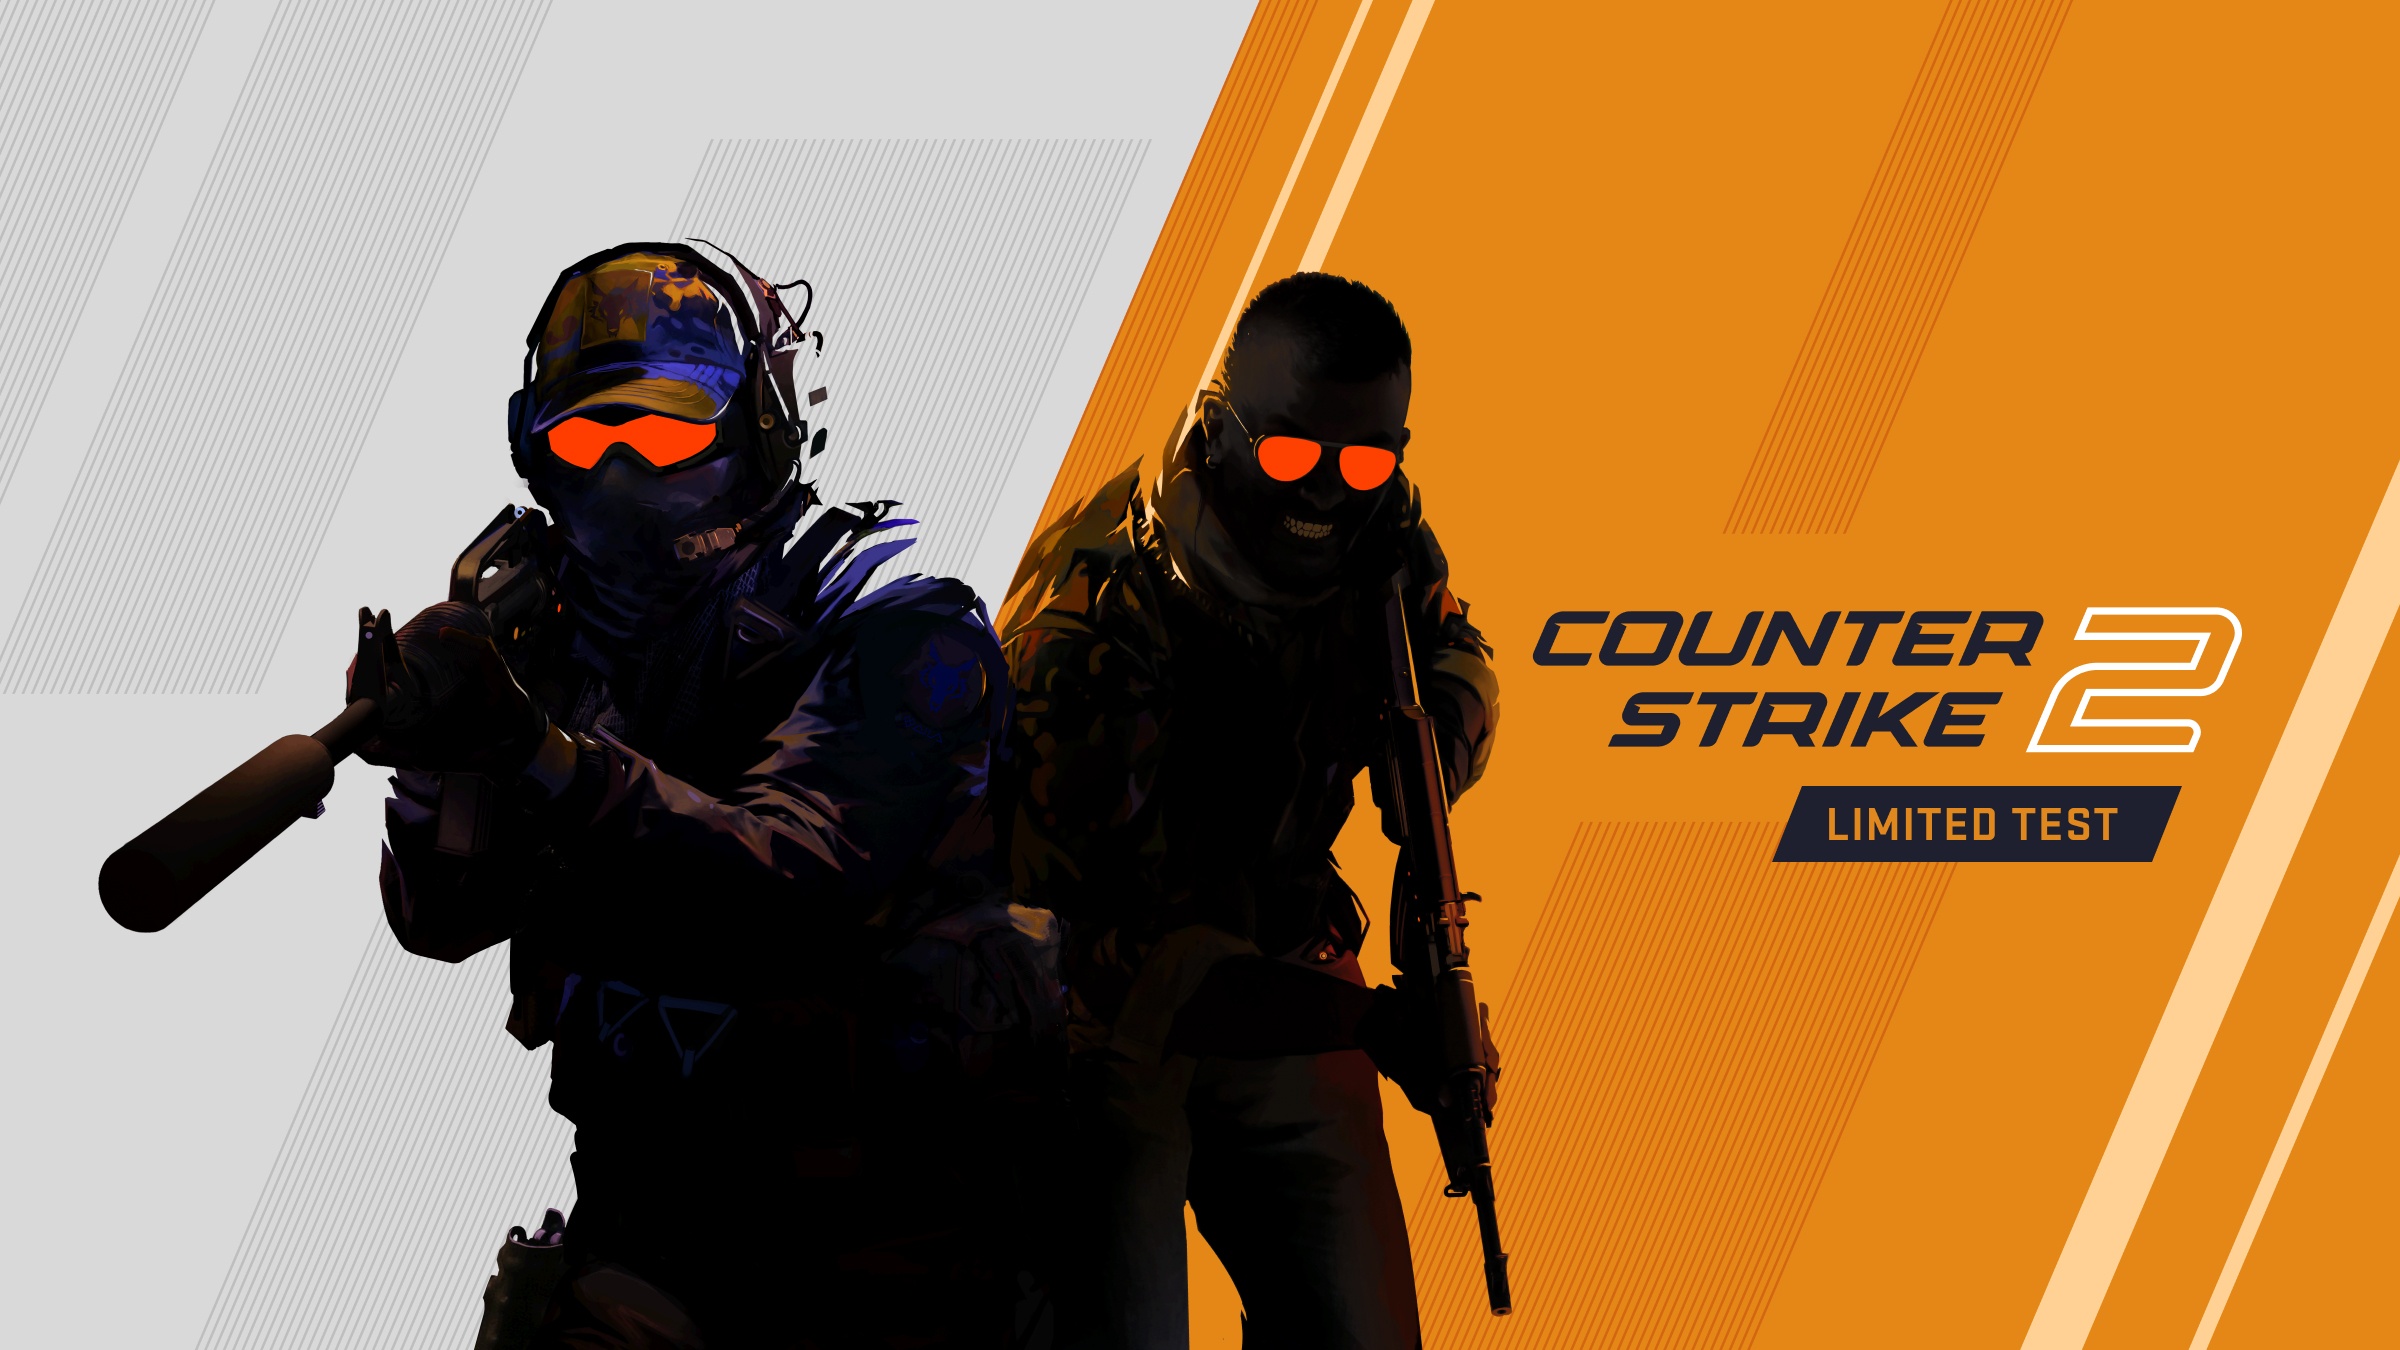 Mobile Version of Counter Strike 2 on the Horizon: Dataminers Suggest